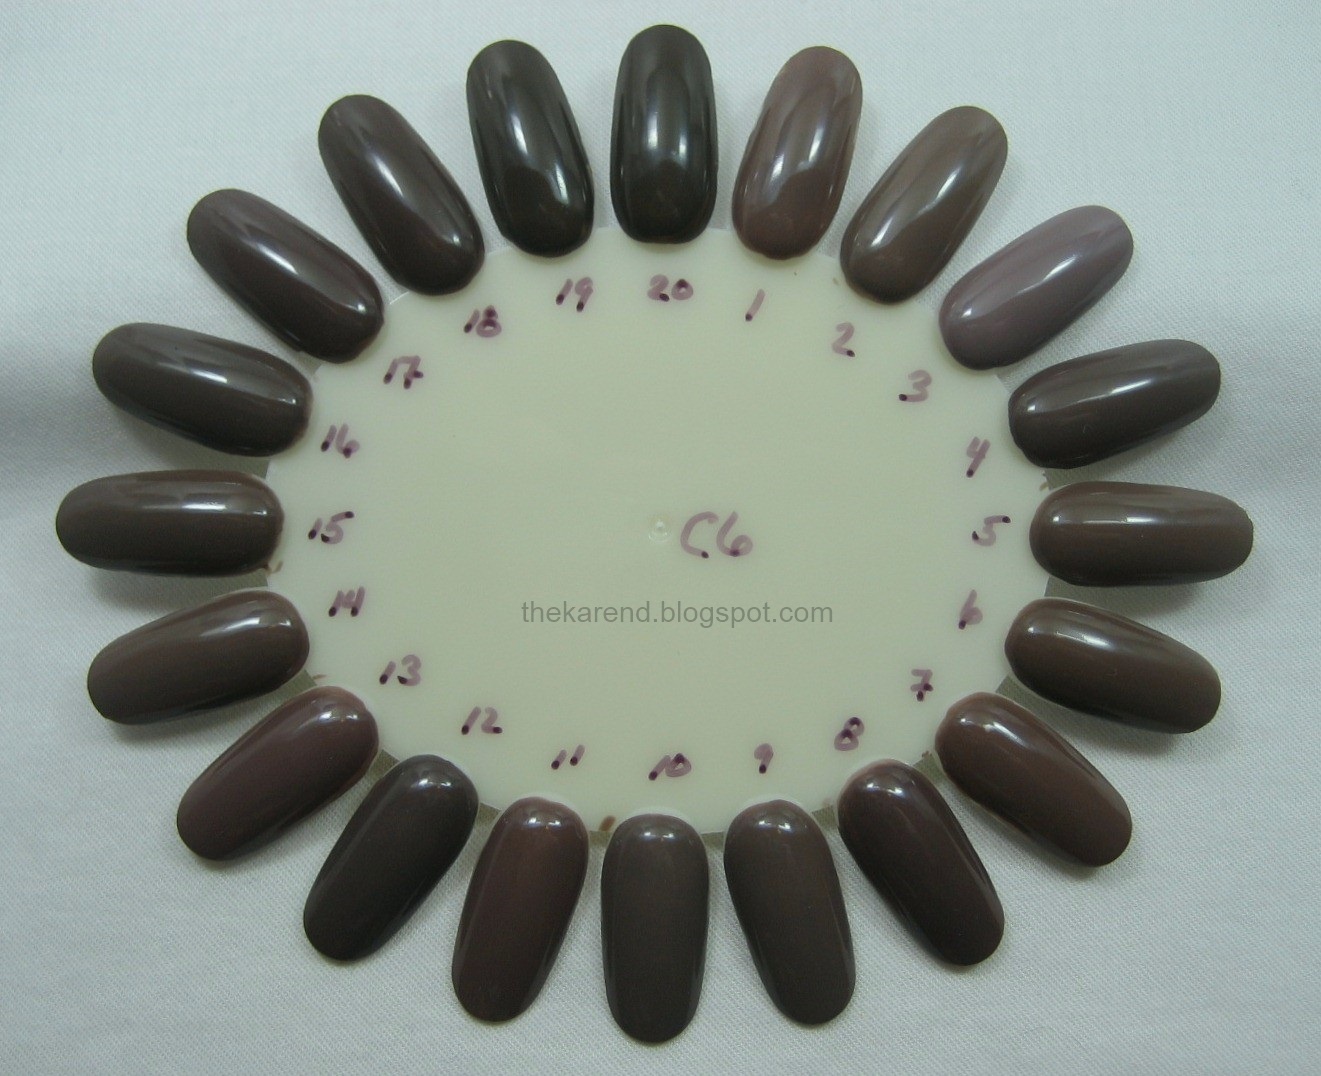 Wheels B6, C6, D6, and and and Bloglovin\' | Brown | E6: Taupe Frazzle Aniploish Cremes